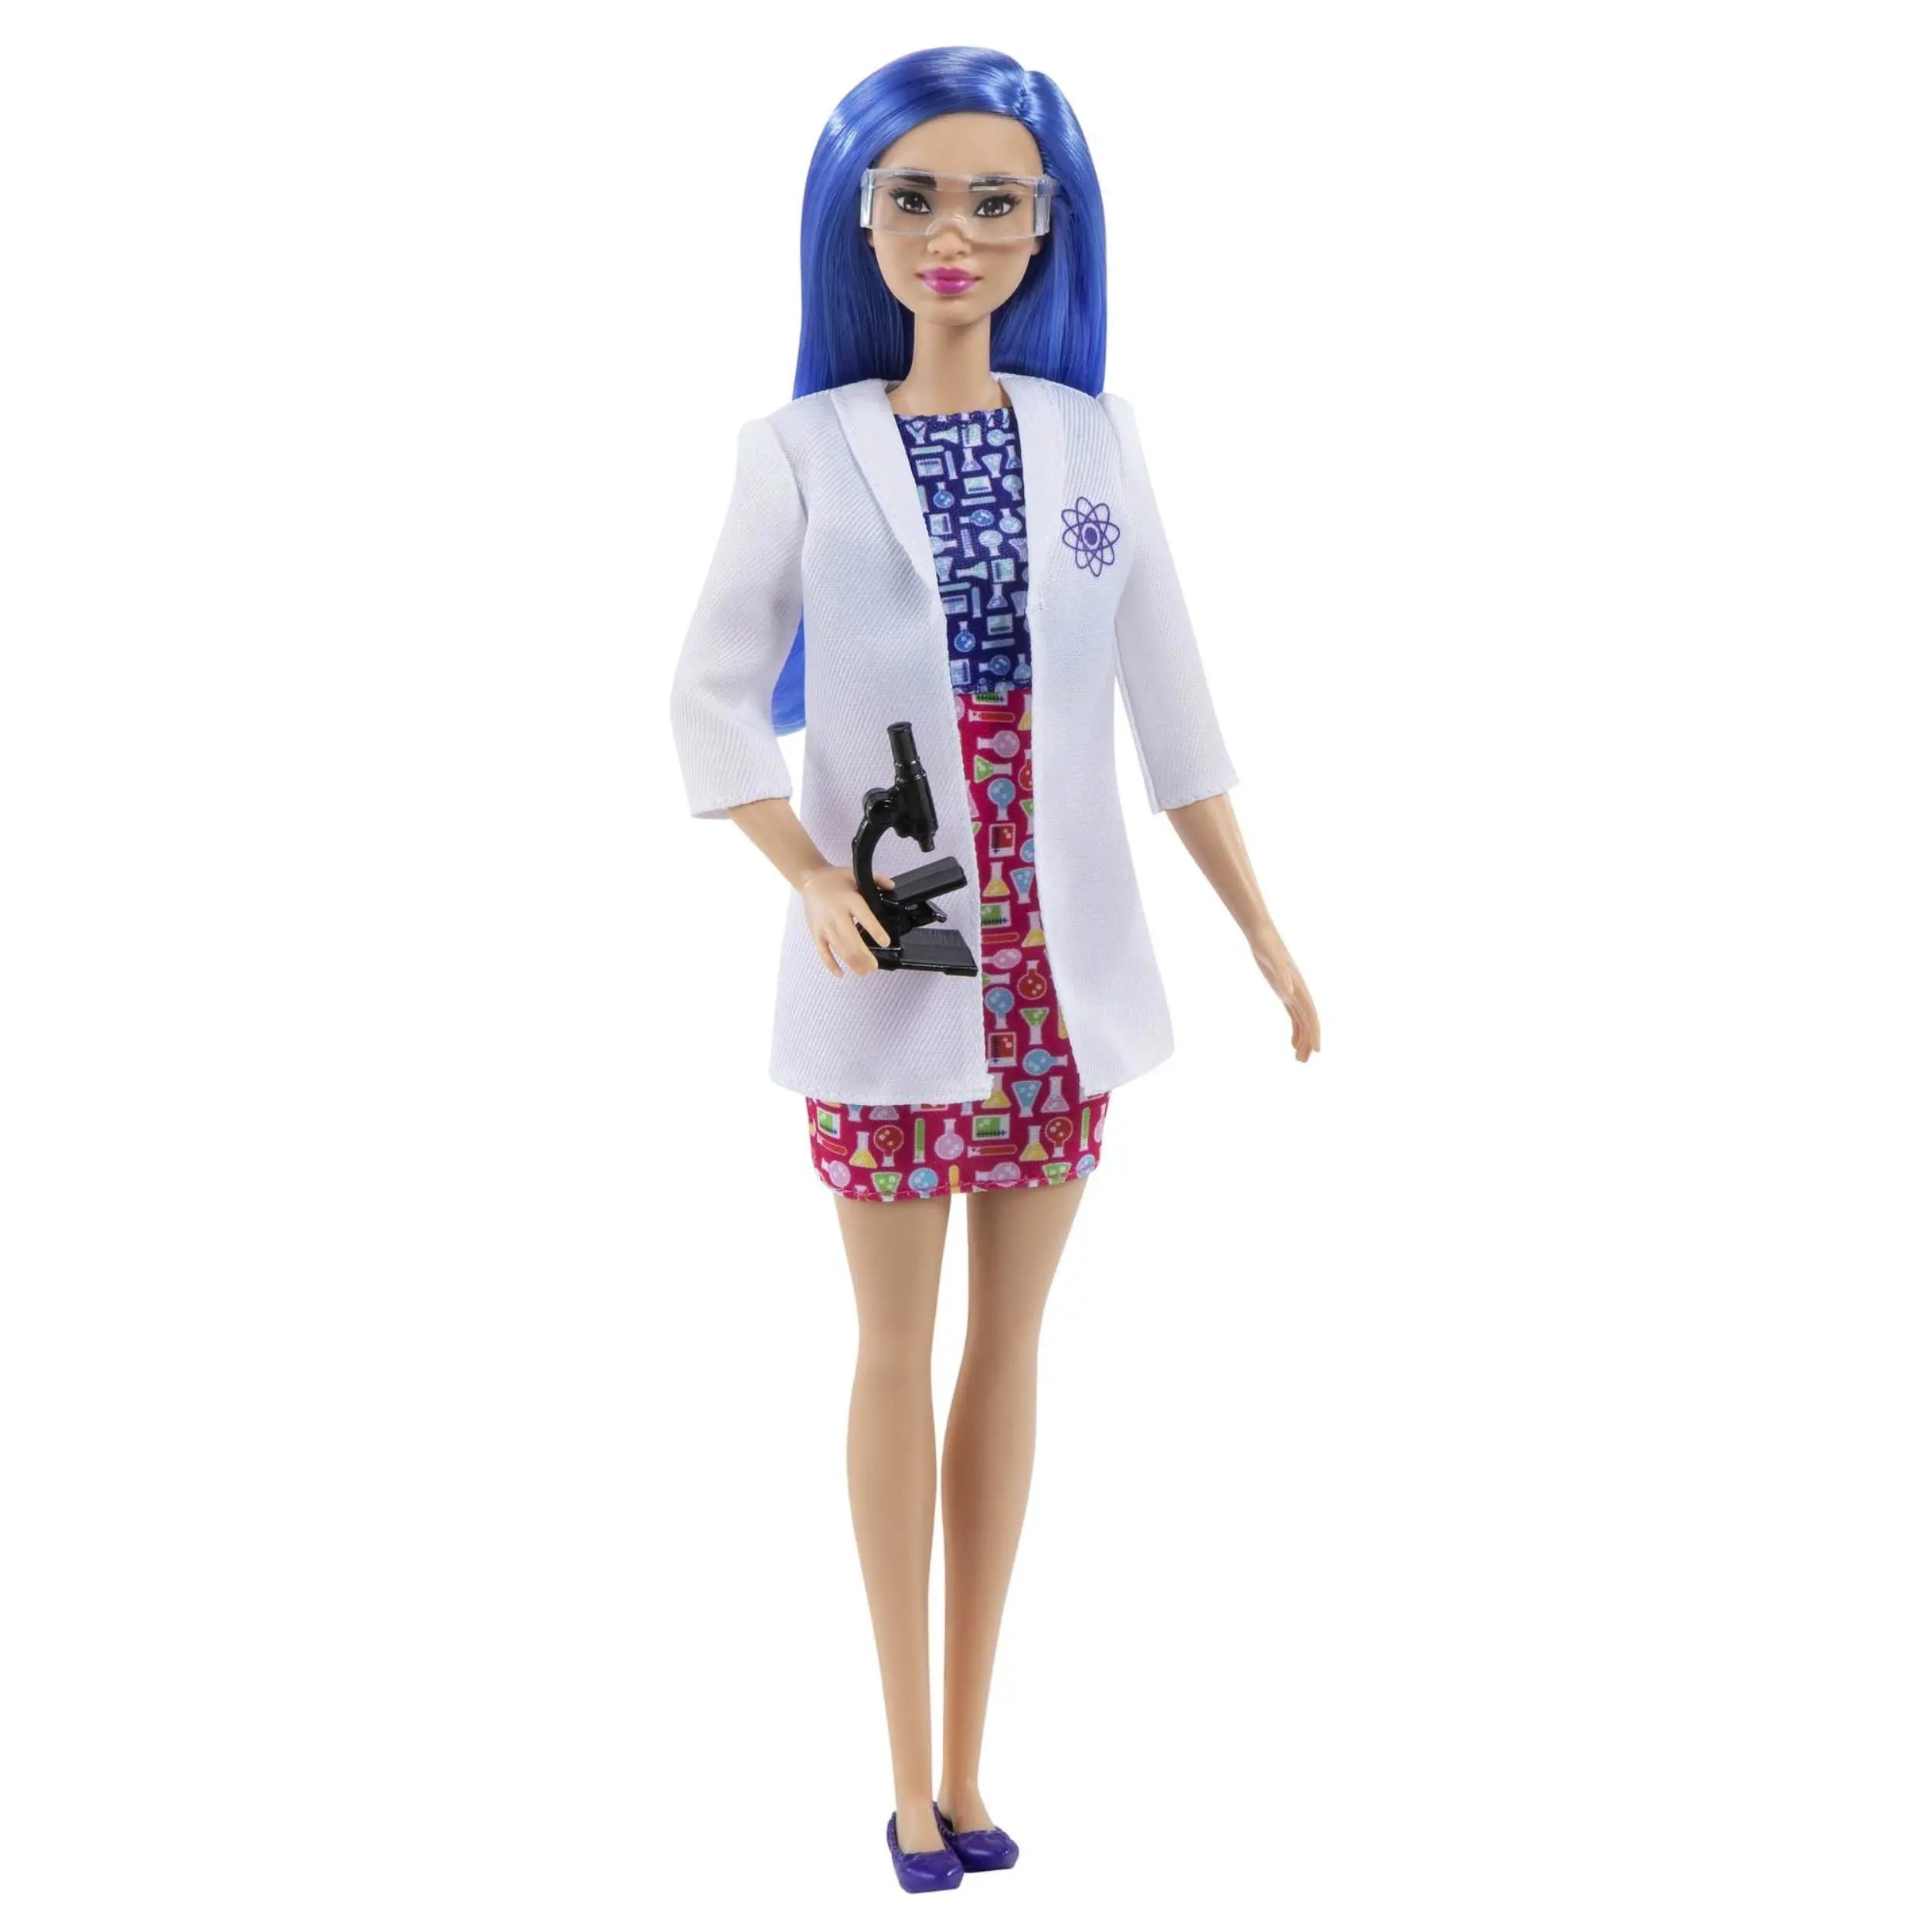 Mattel - Barbie You can Be Anything - Scientist Doll HCN11